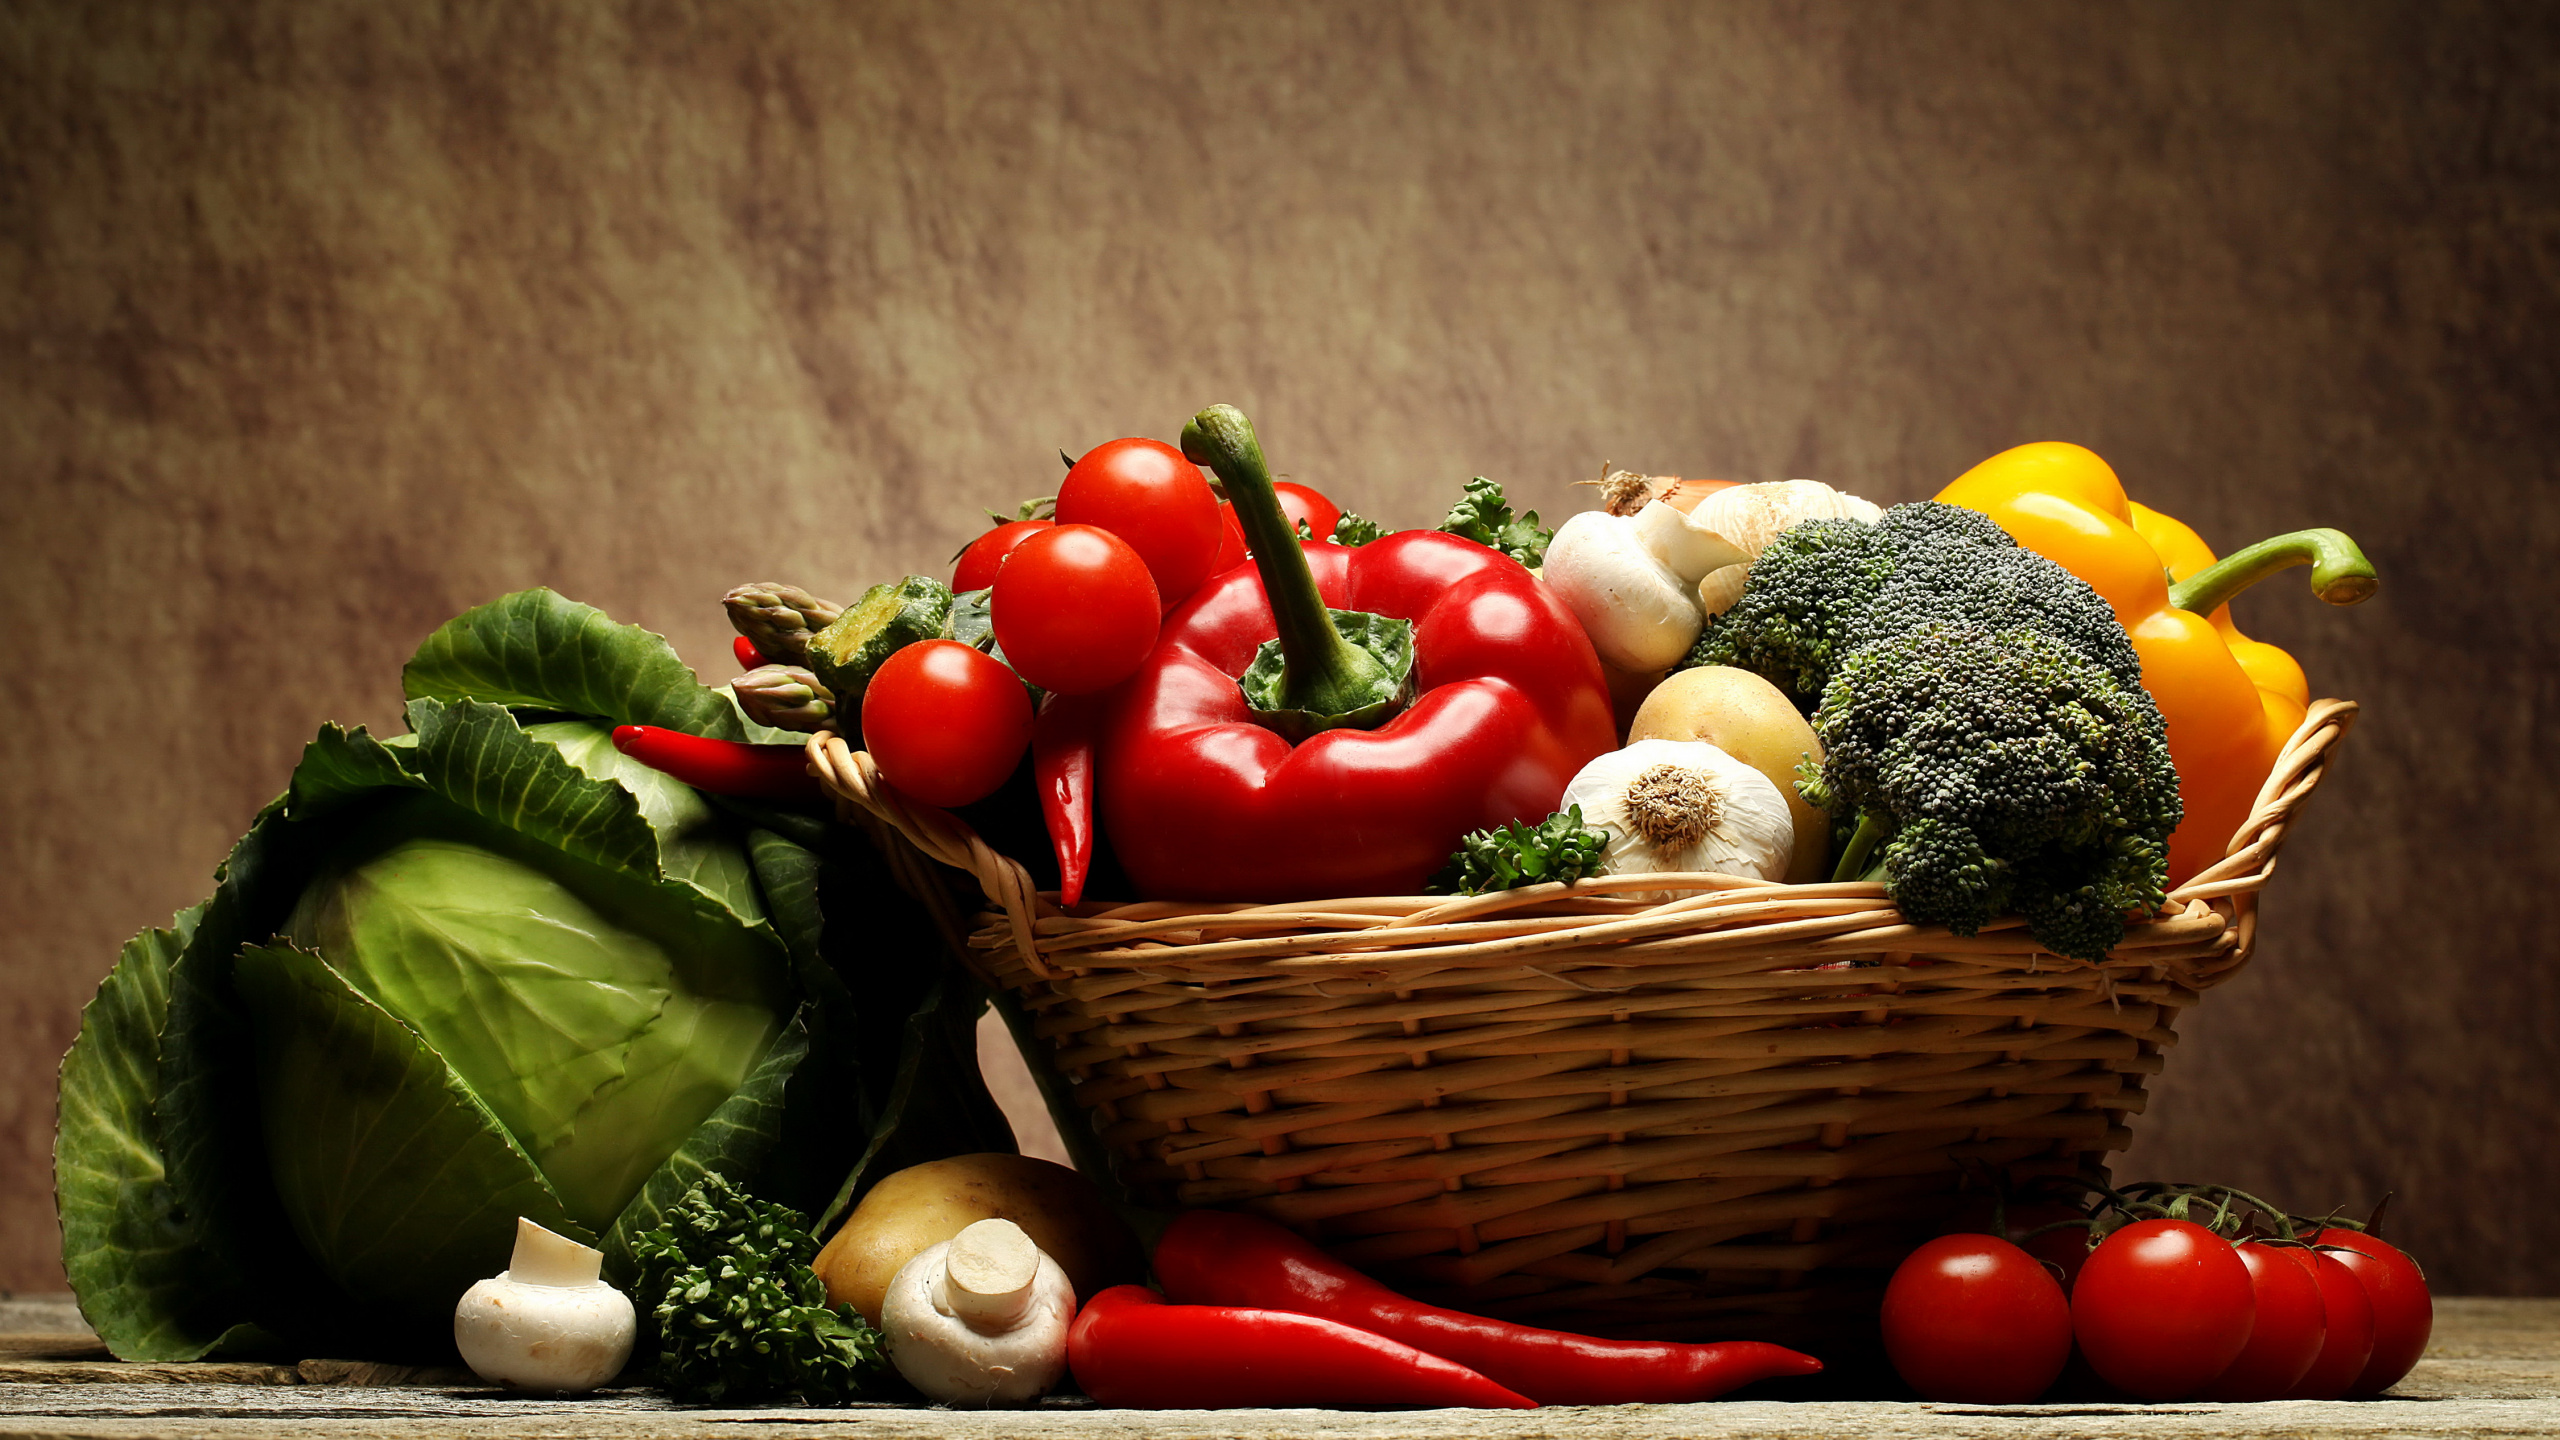 Red Tomatoes and Green Vegetable on Brown Woven Basket. Wallpaper in 2560x1440 Resolution